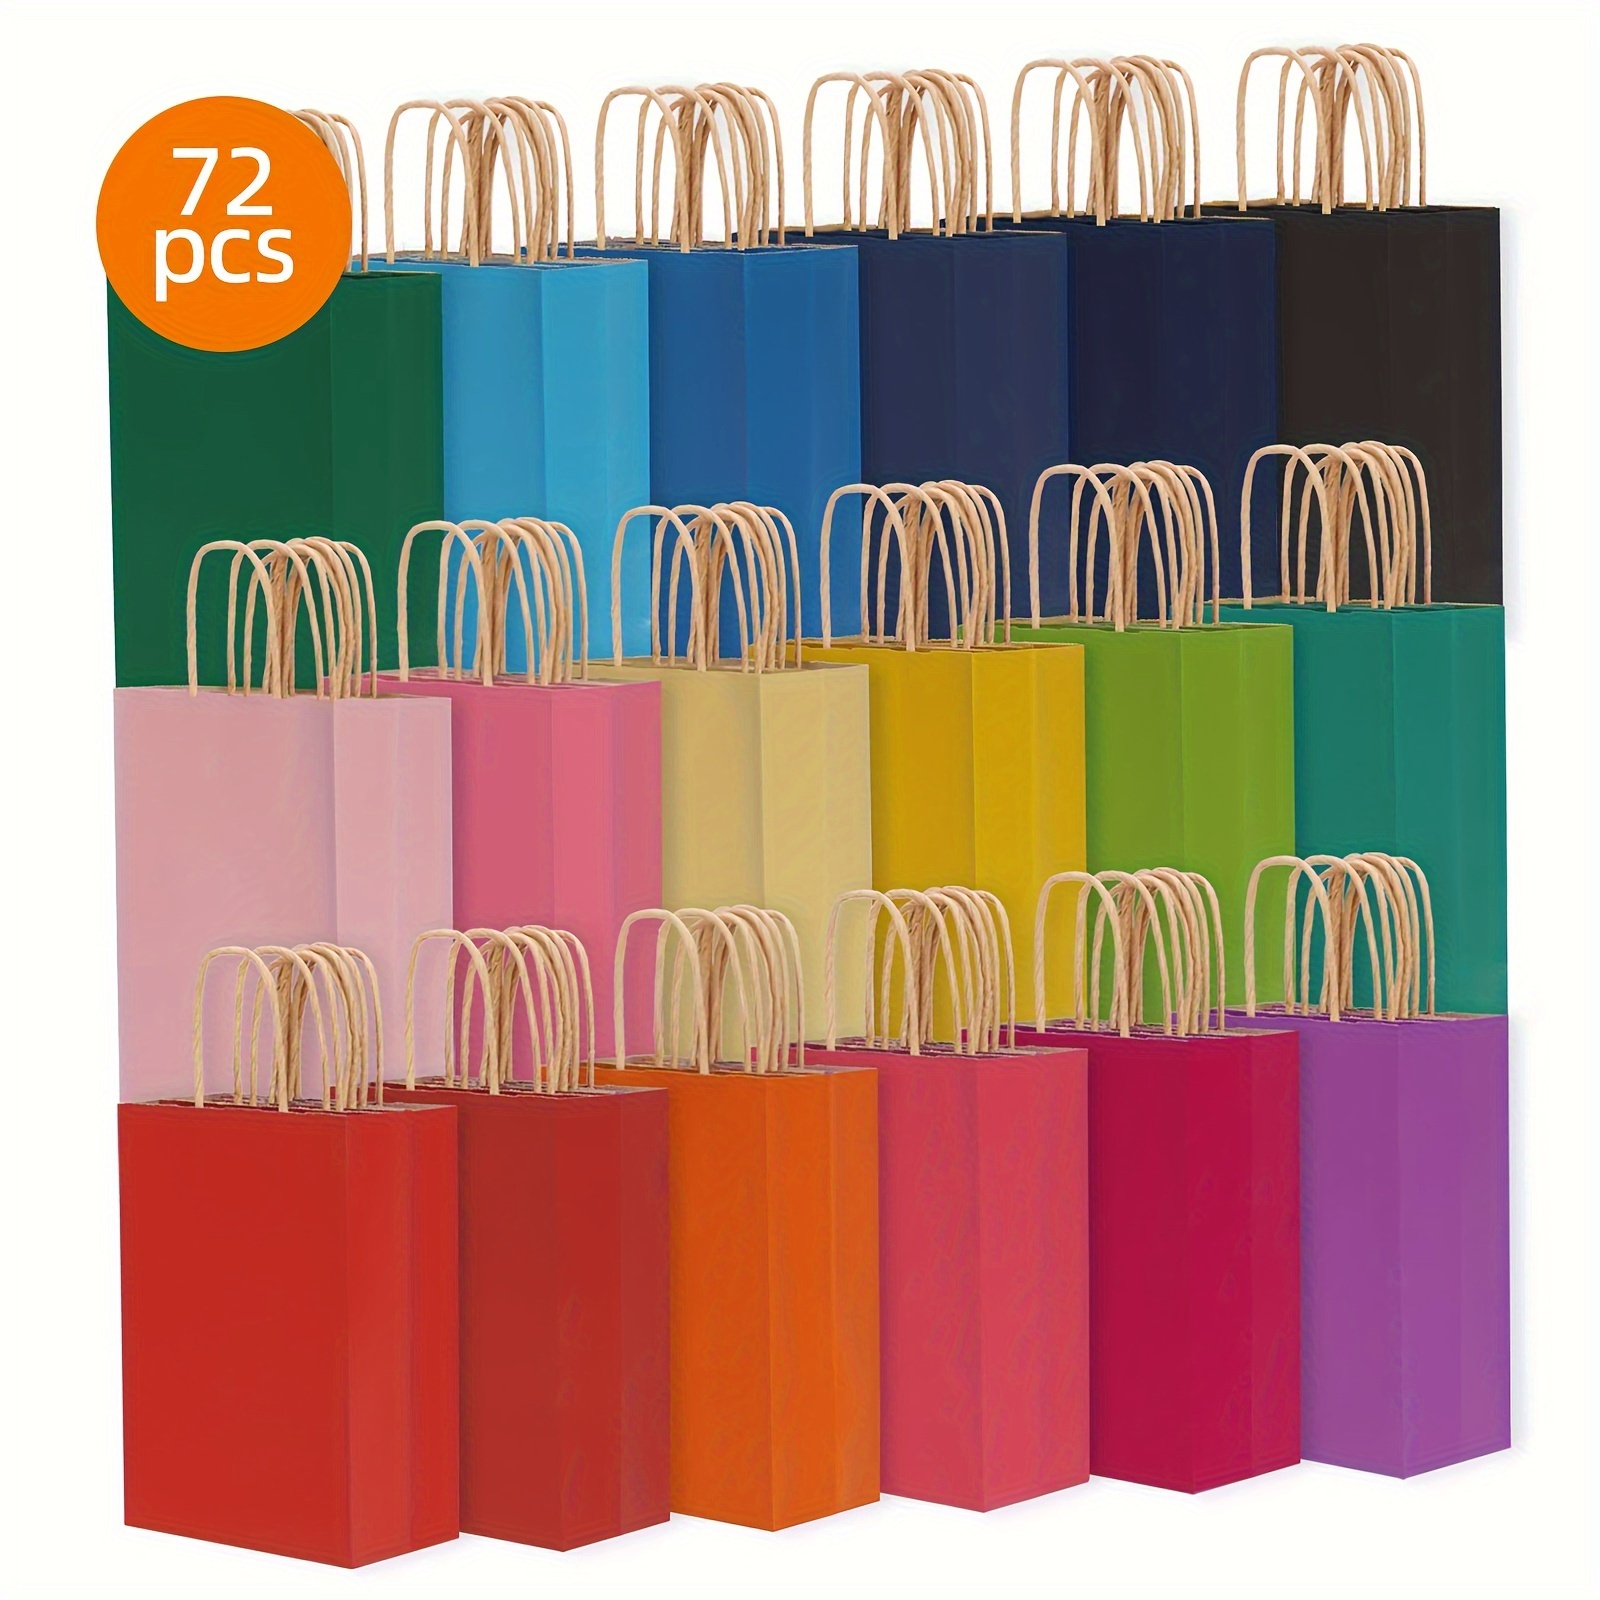 

72pcs 18 Colors Small Gift Bags, Gift Bags Bulk, Paper Bags With Handles, Party Favor Bags For Birthday Parties, Wedding Parties, Fiesta, Graduation Parties, 8.7 X 6.3 X 3.1 In